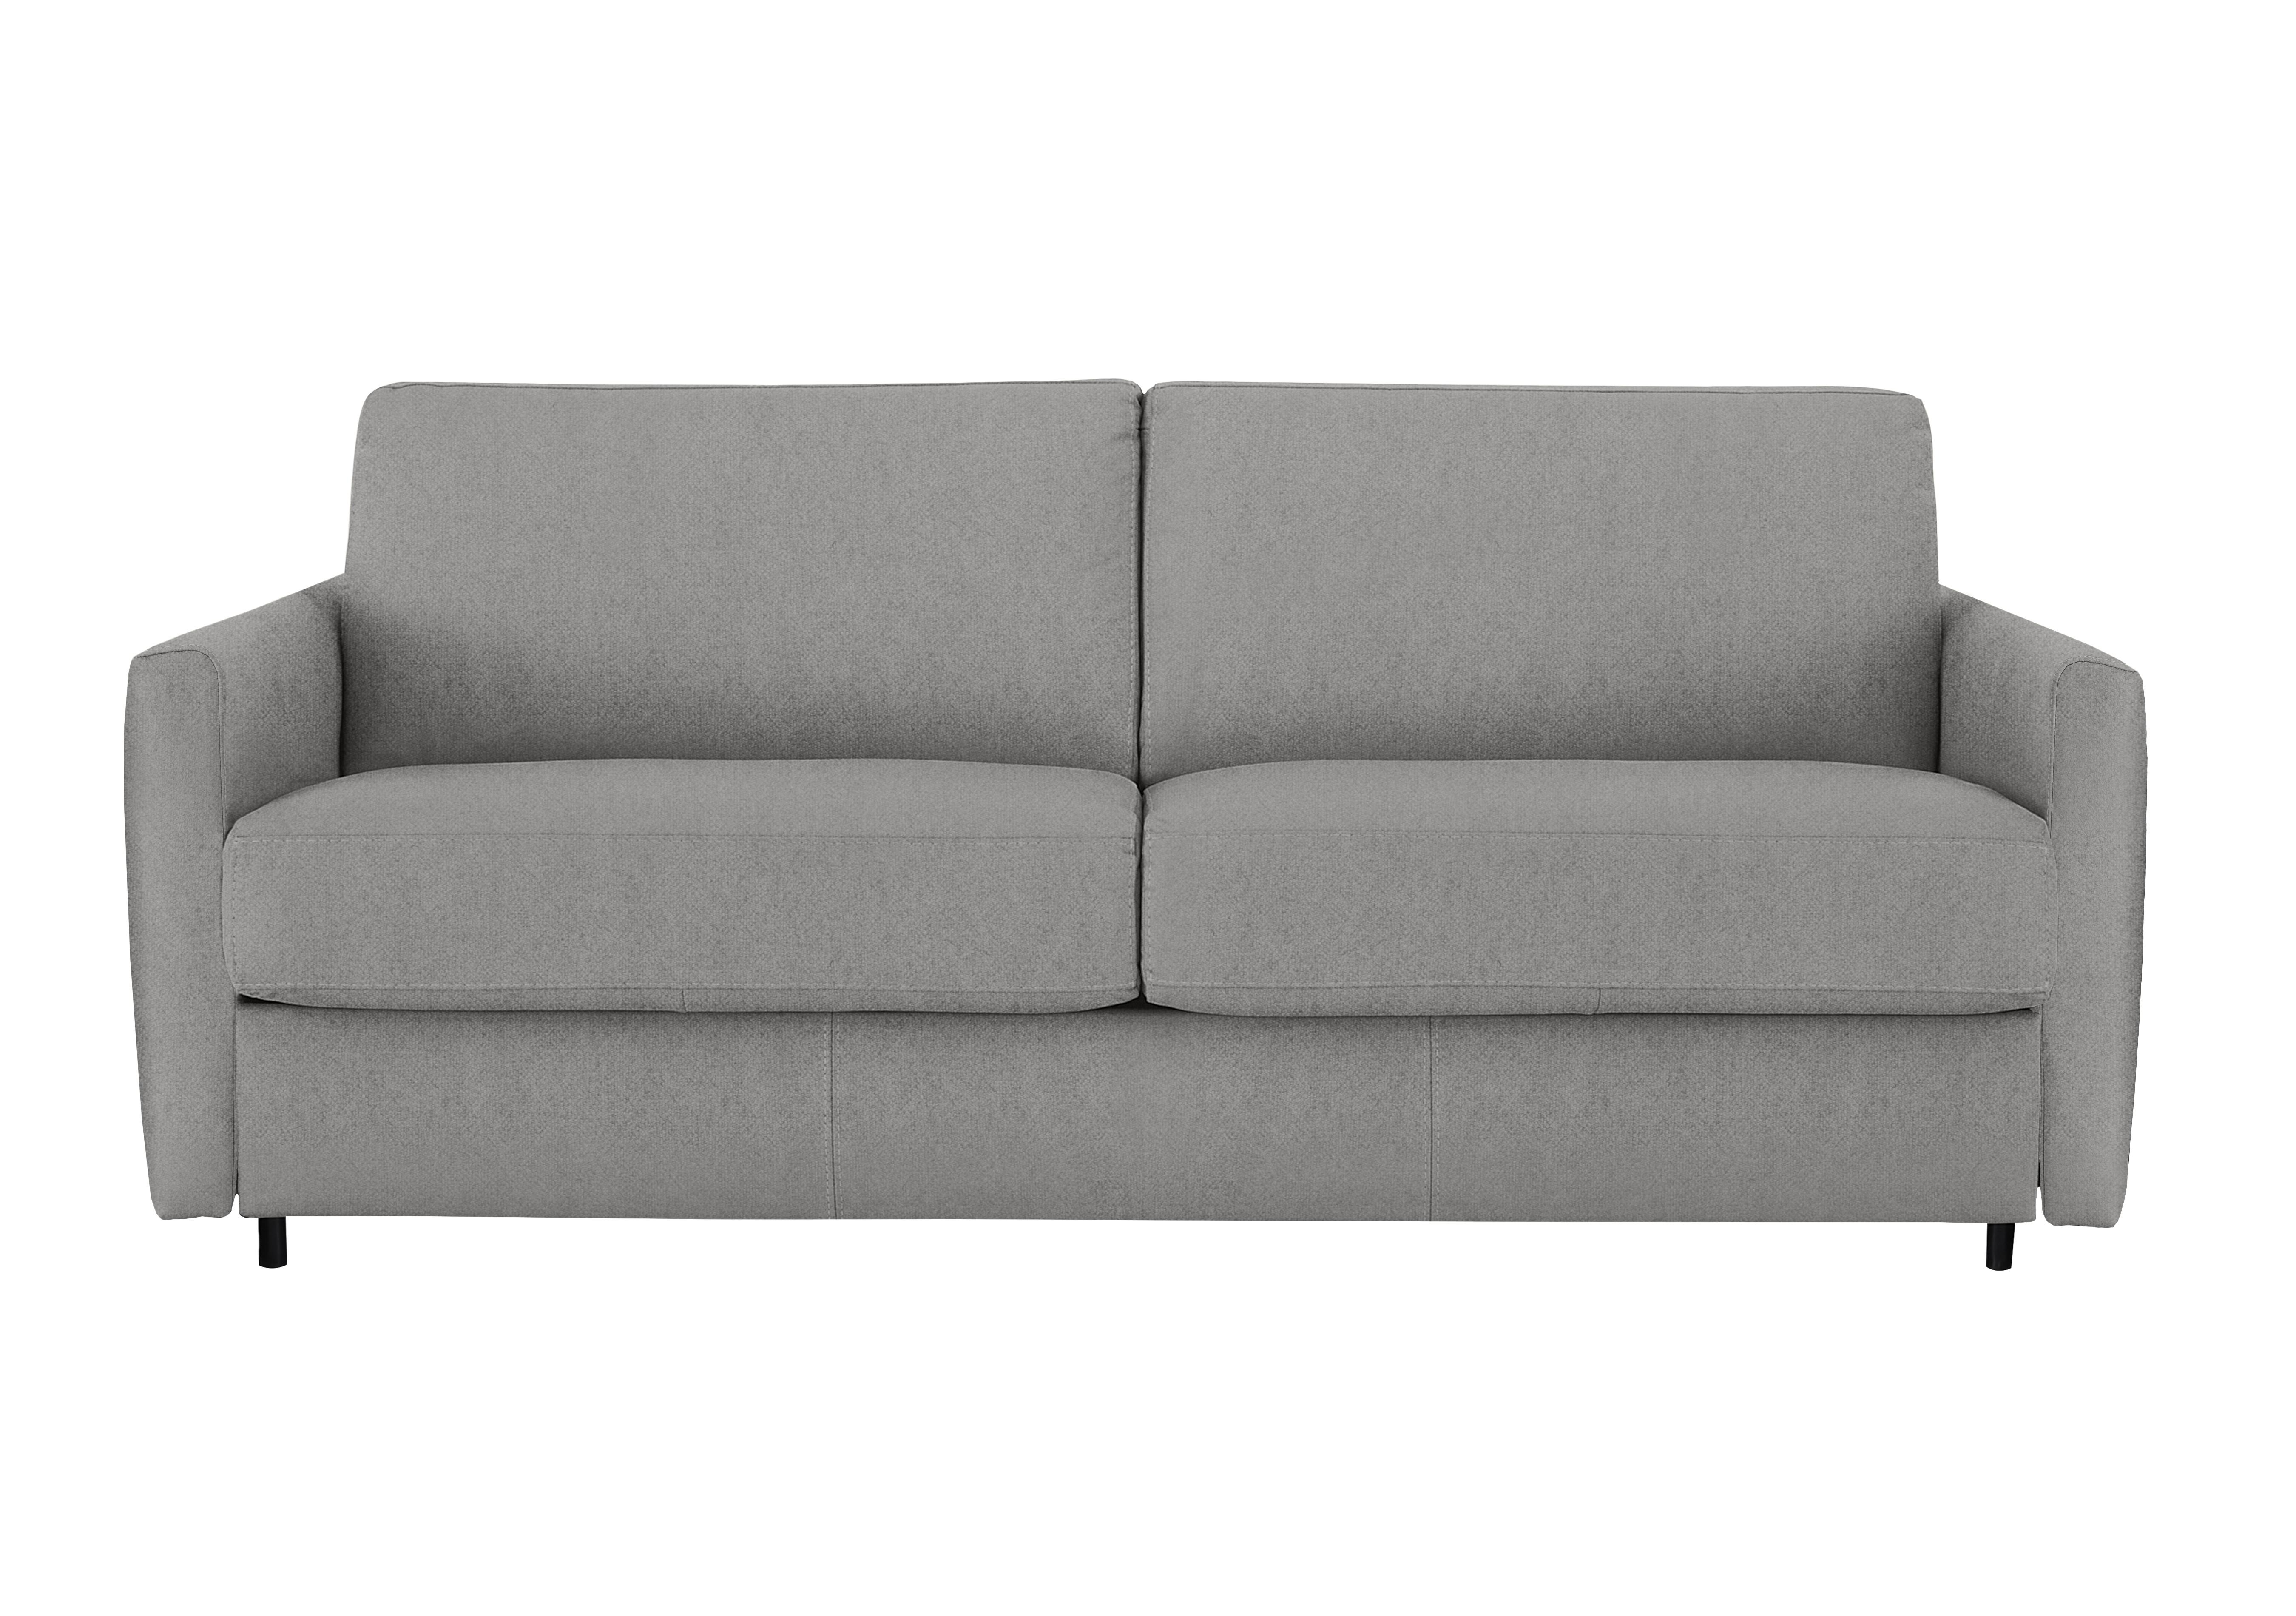 Alcova 3 Seater Fabric Sofa Bed with Slim Arms in Fuente Ash on Furniture Village